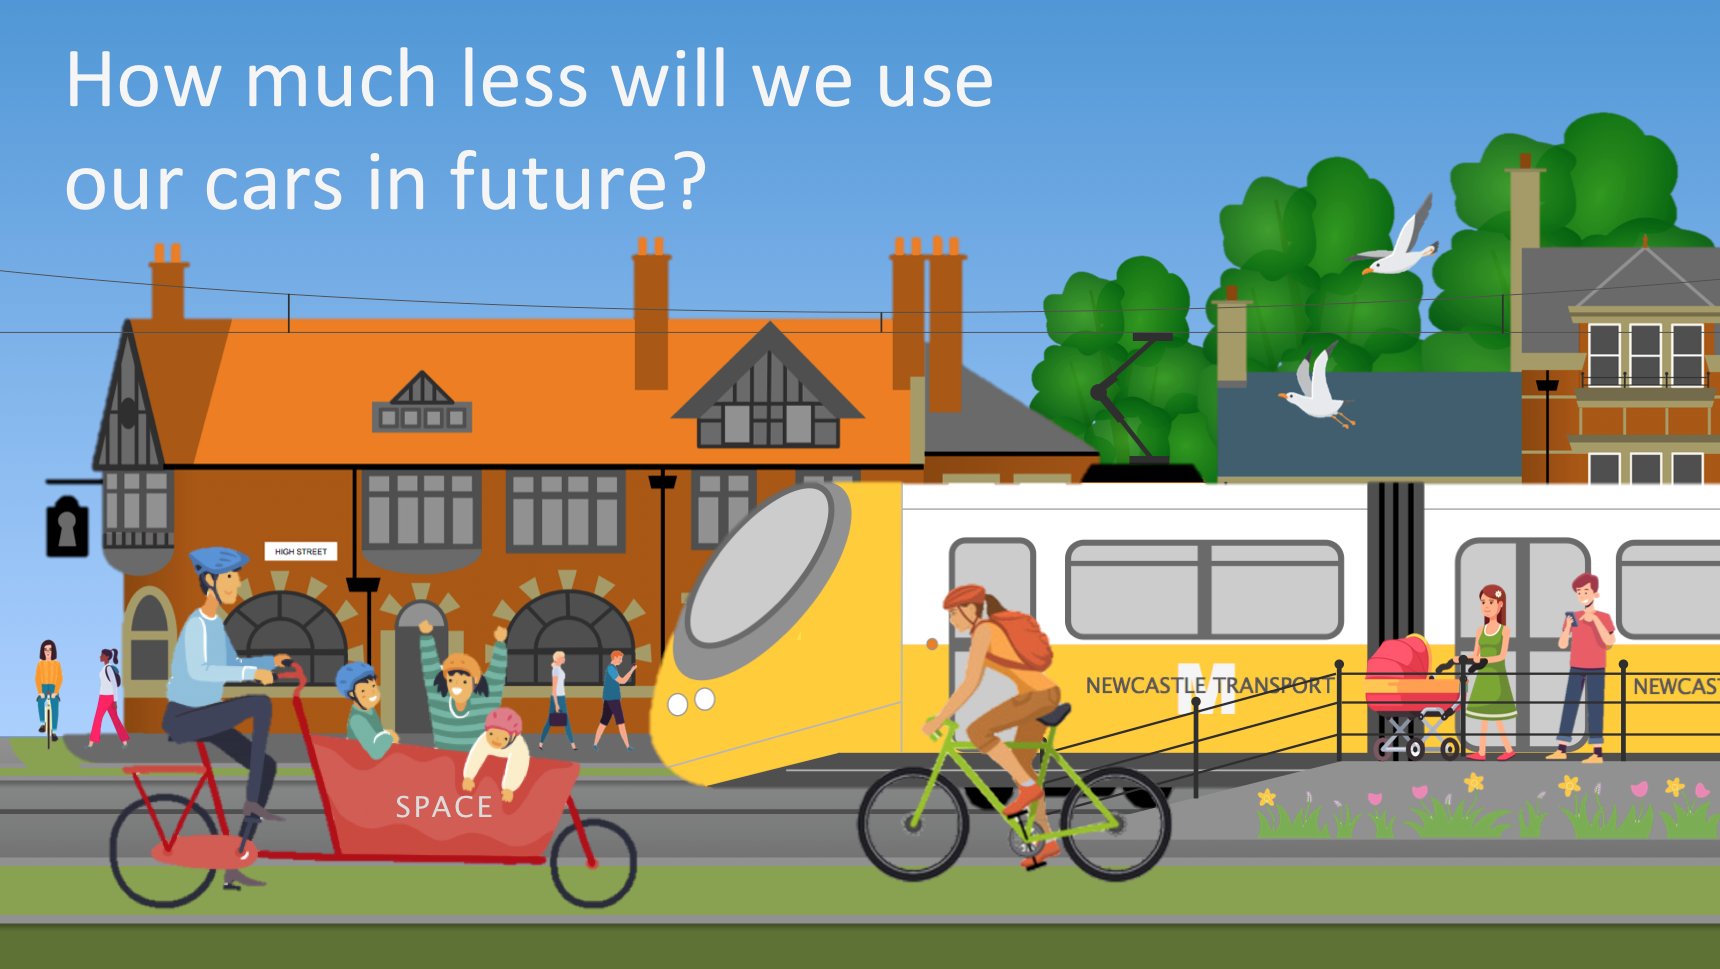 Picture of Gosforth High Street with a tram and text "How much less will we use our cars in future".